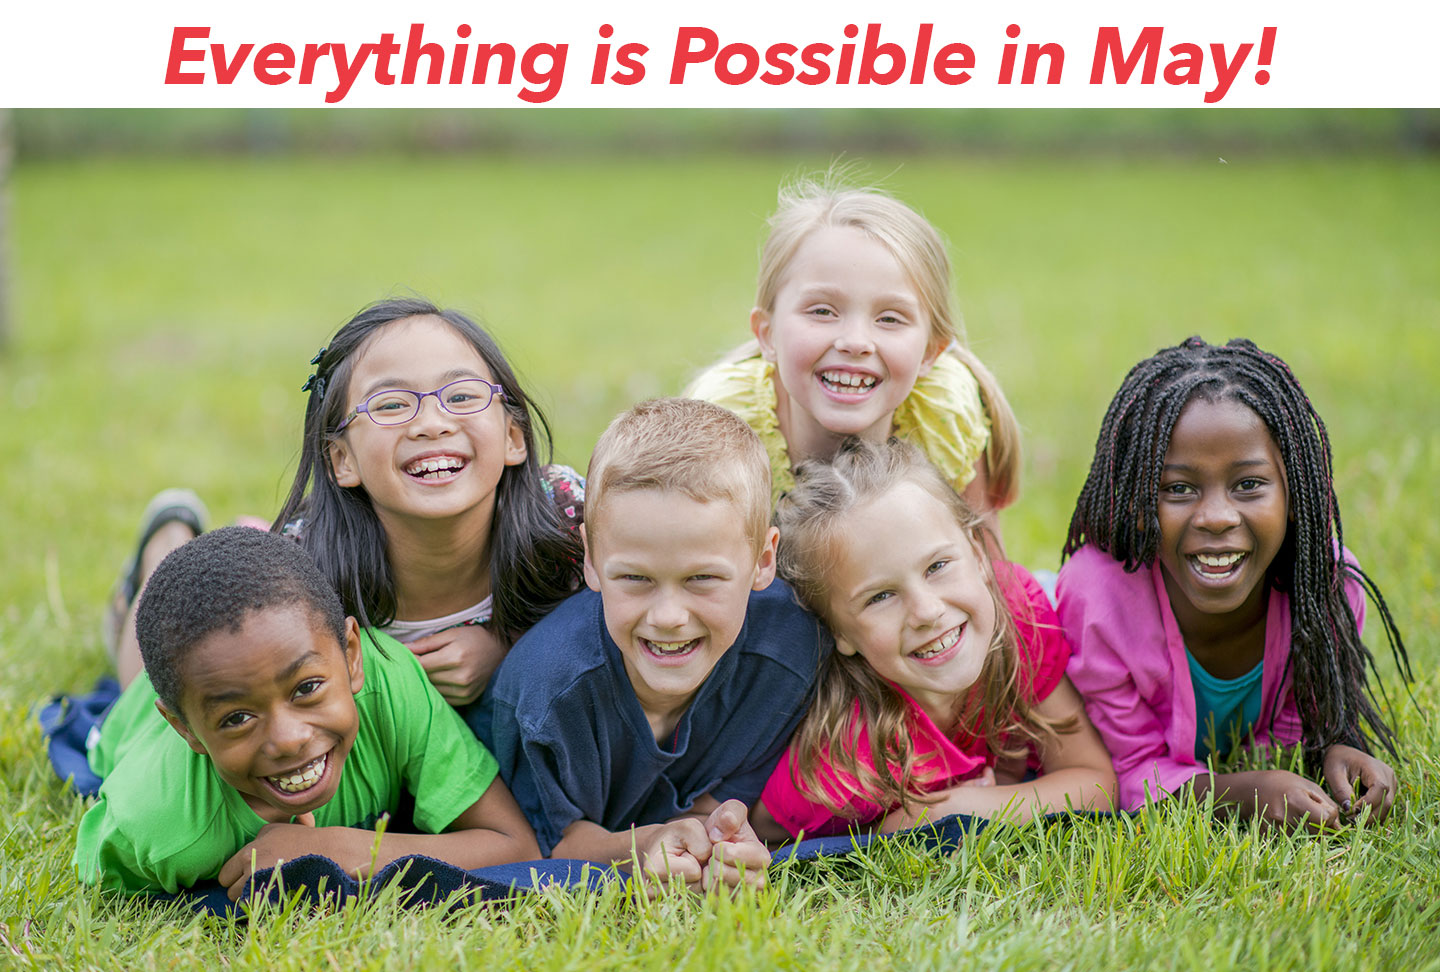 everything-is-possible-may-children-on-lawn